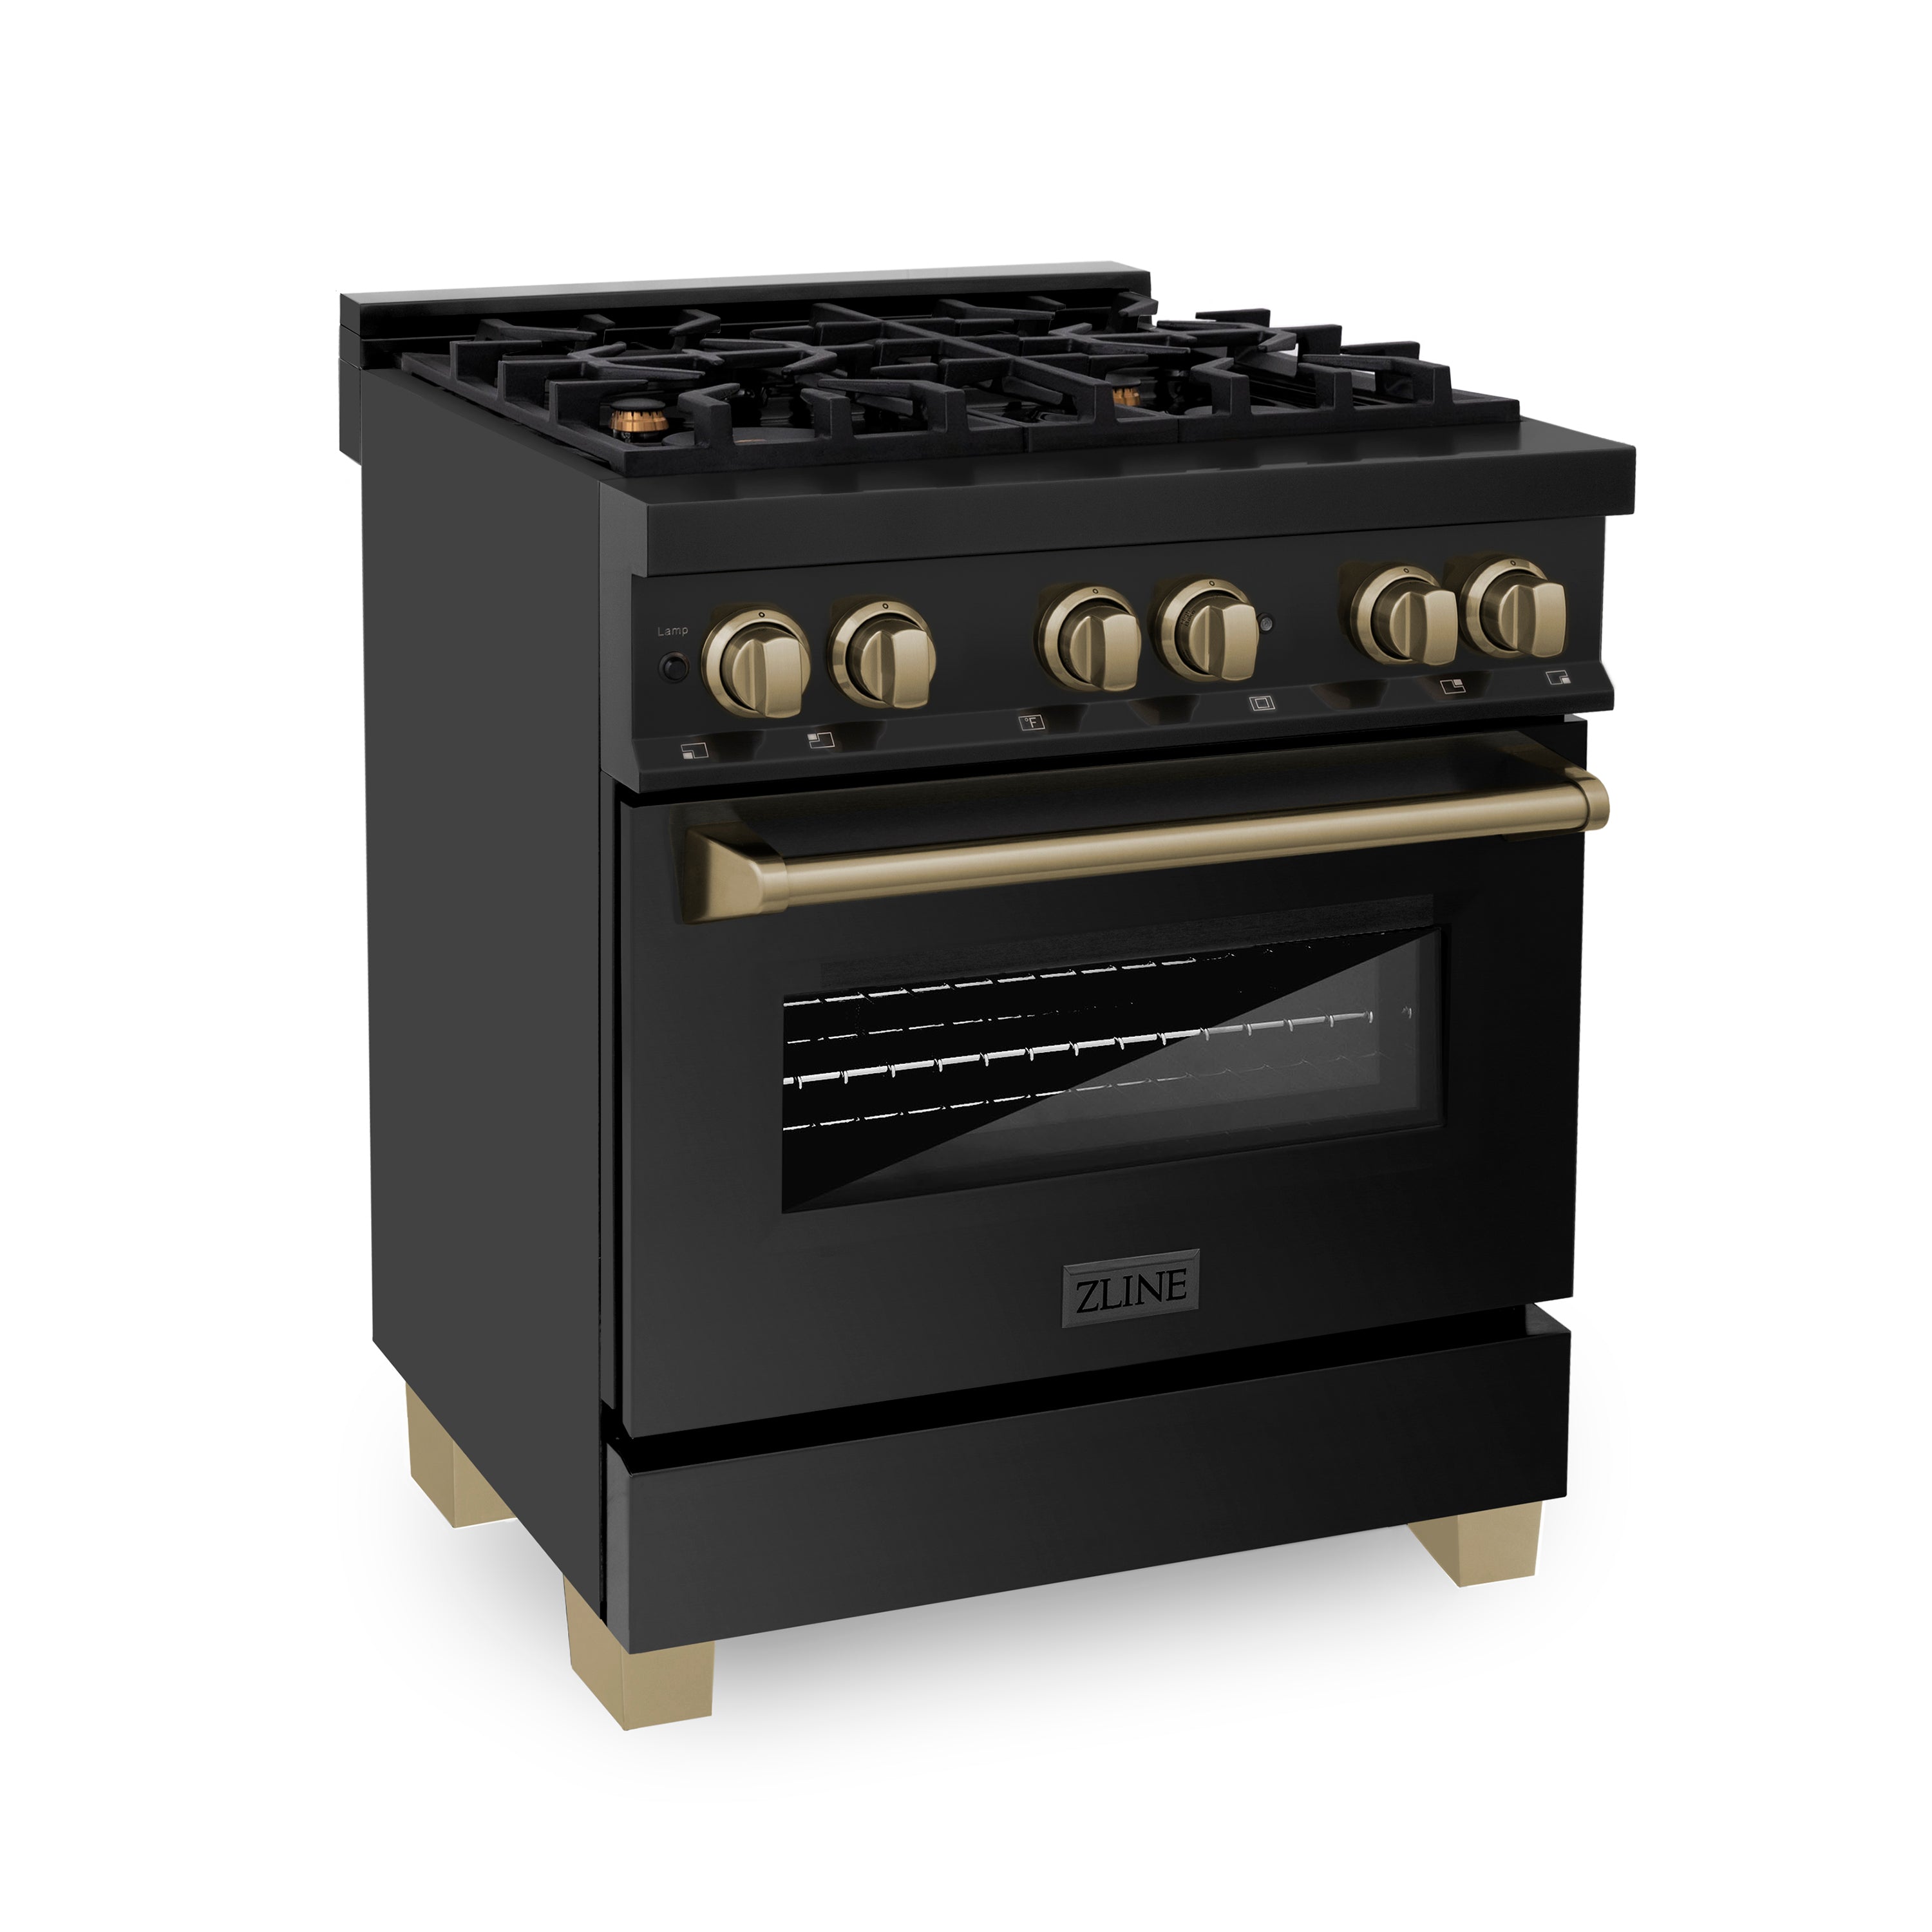 ZLINE Autograph Edition 30" 4.0 cu. ft. Dual Fuel Range with Gas Stove and Electric Oven in Black Stainless Steel with Champagne Bronze Accents (RABZ-30-CB)